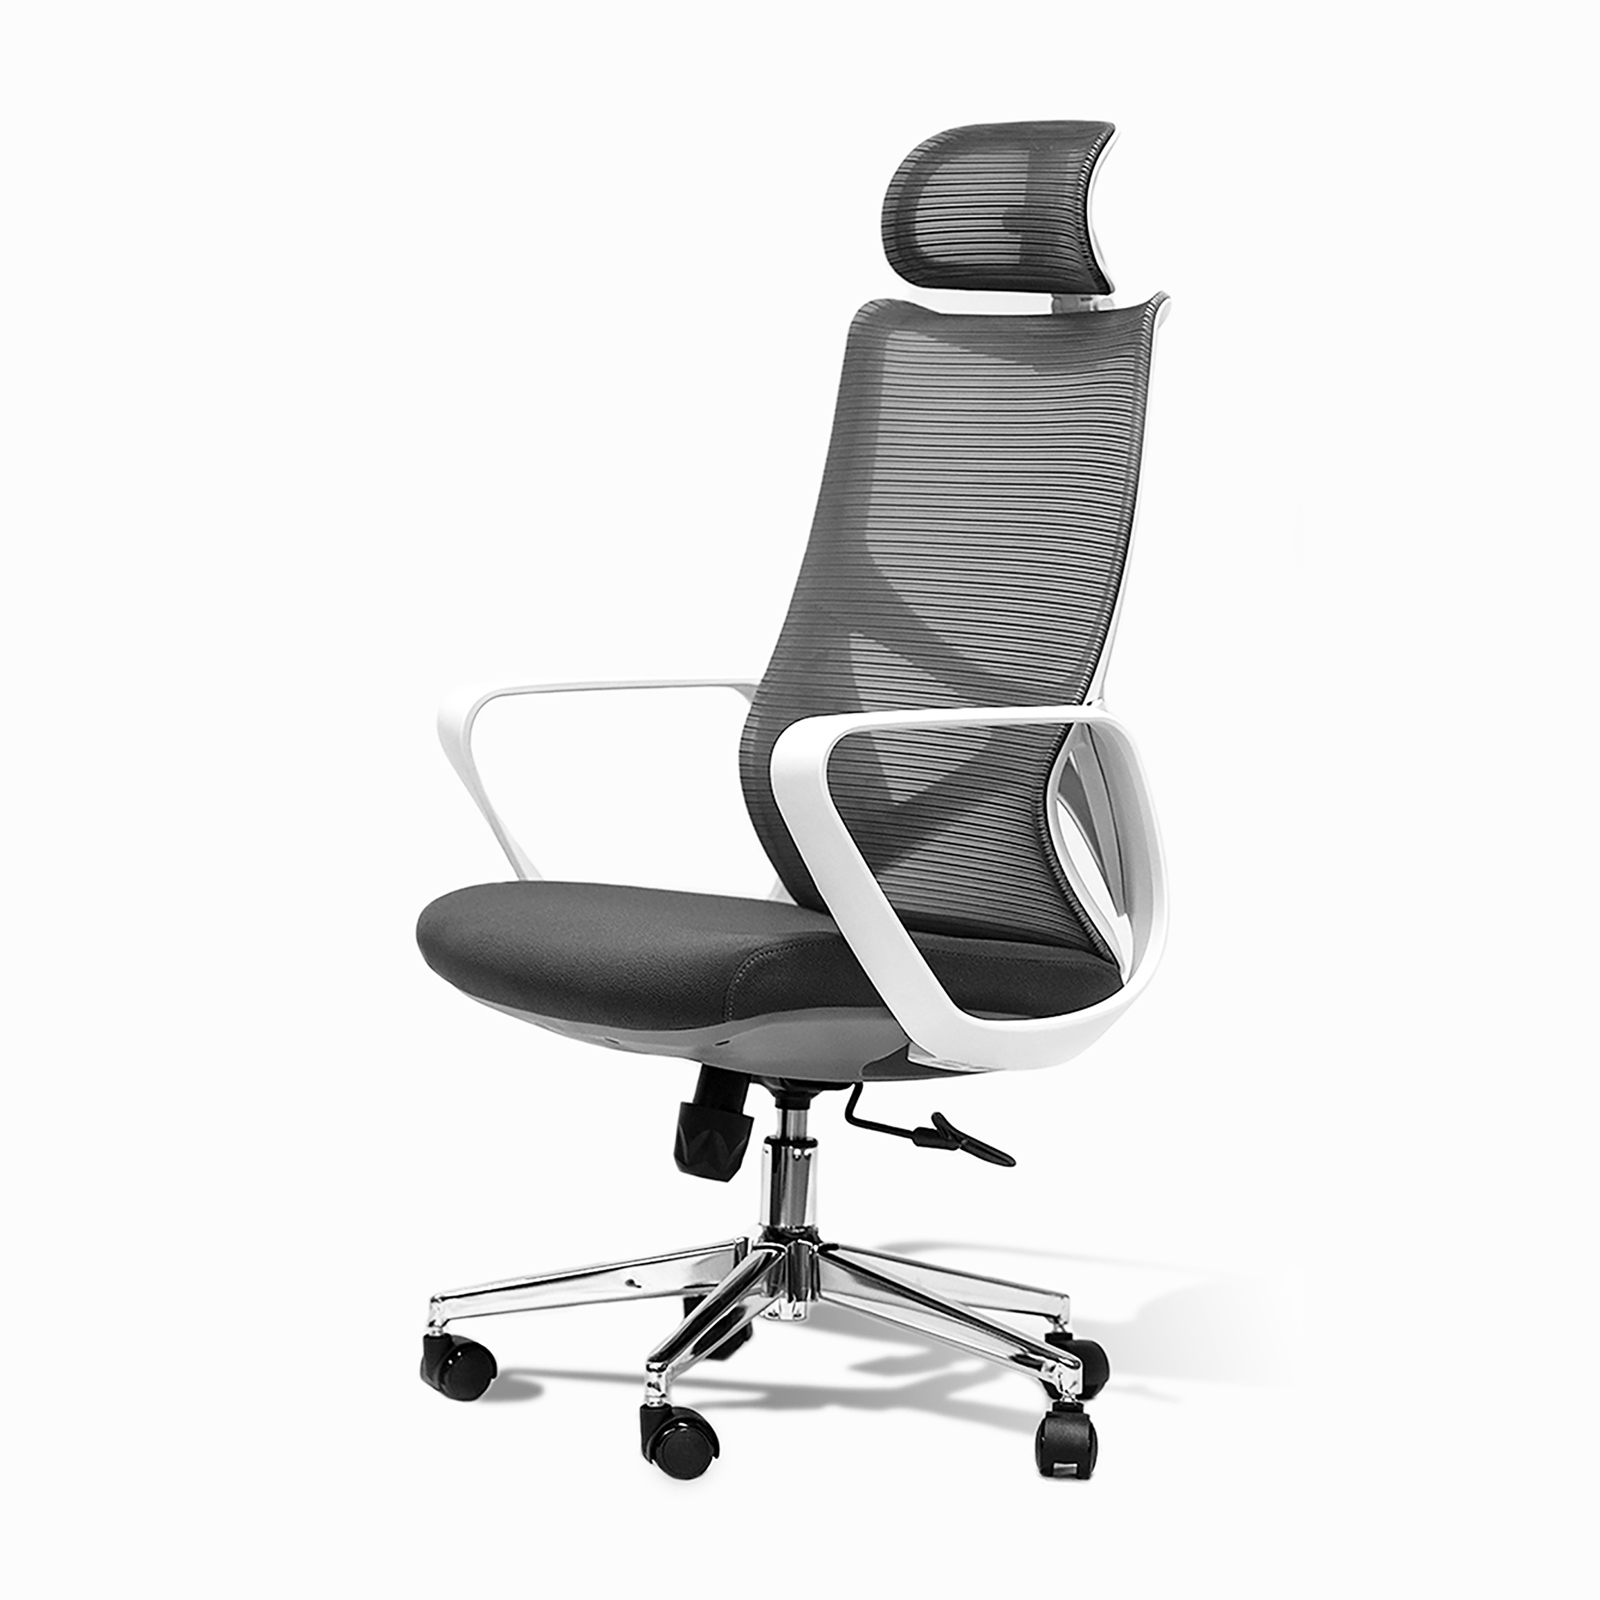 MIUZ COSMO Chair With Headrest Adjustable Breathable Ergonomic Mesh Office Computer Chair with Lumbar Support & Headrest Swivel